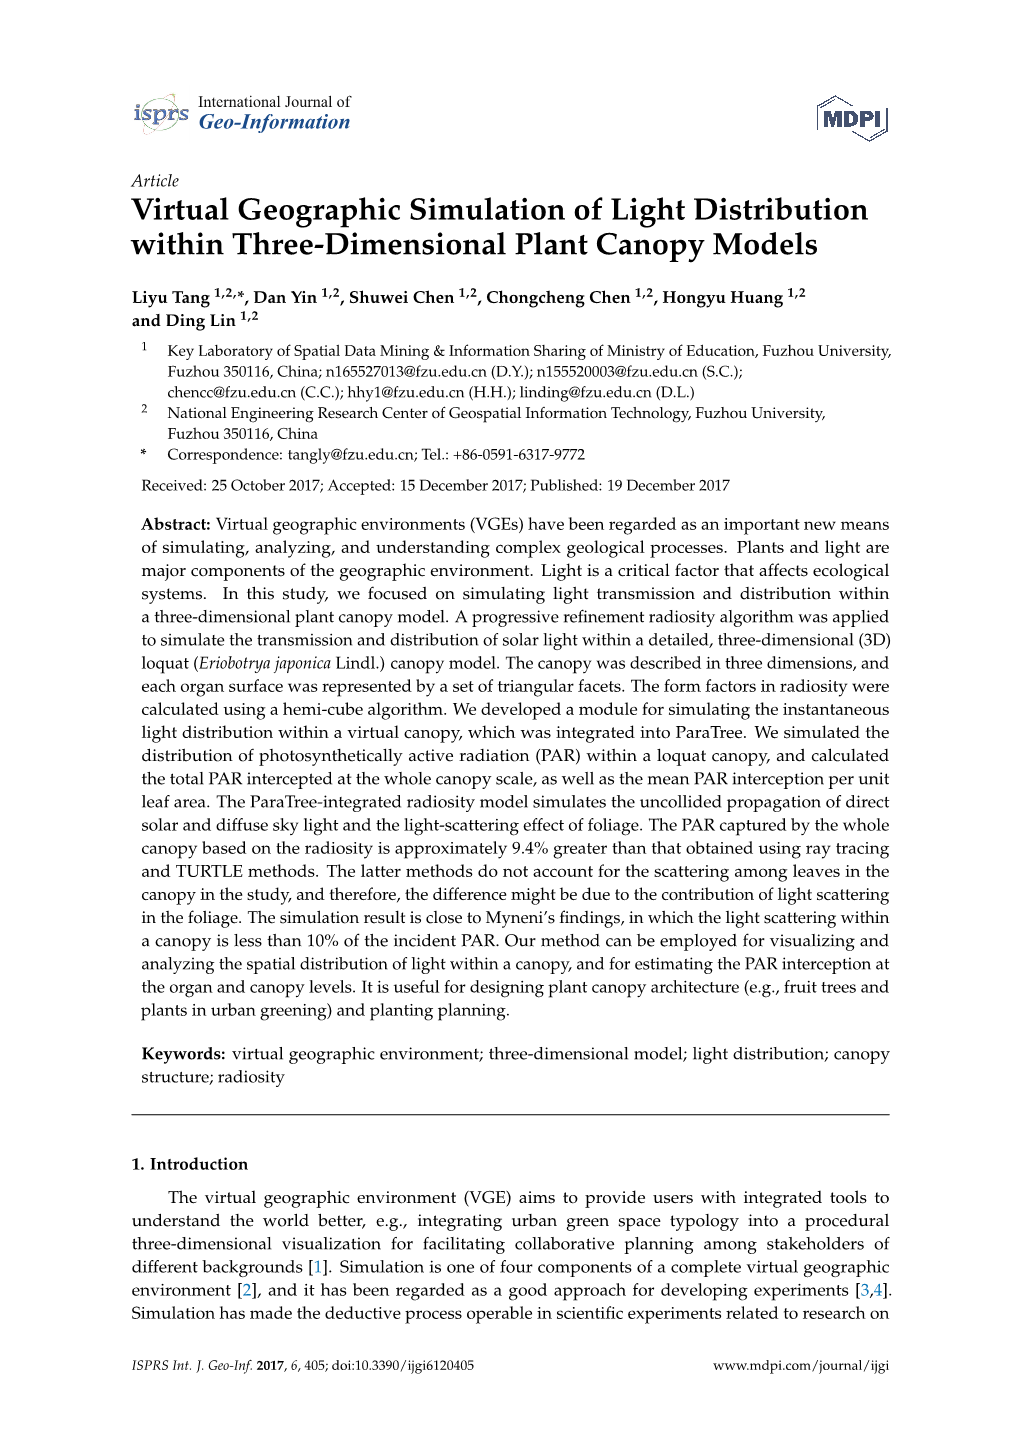 Virtual Geographic Simulation of Light Distribution Within Three-Dimensional Plant Canopy Models